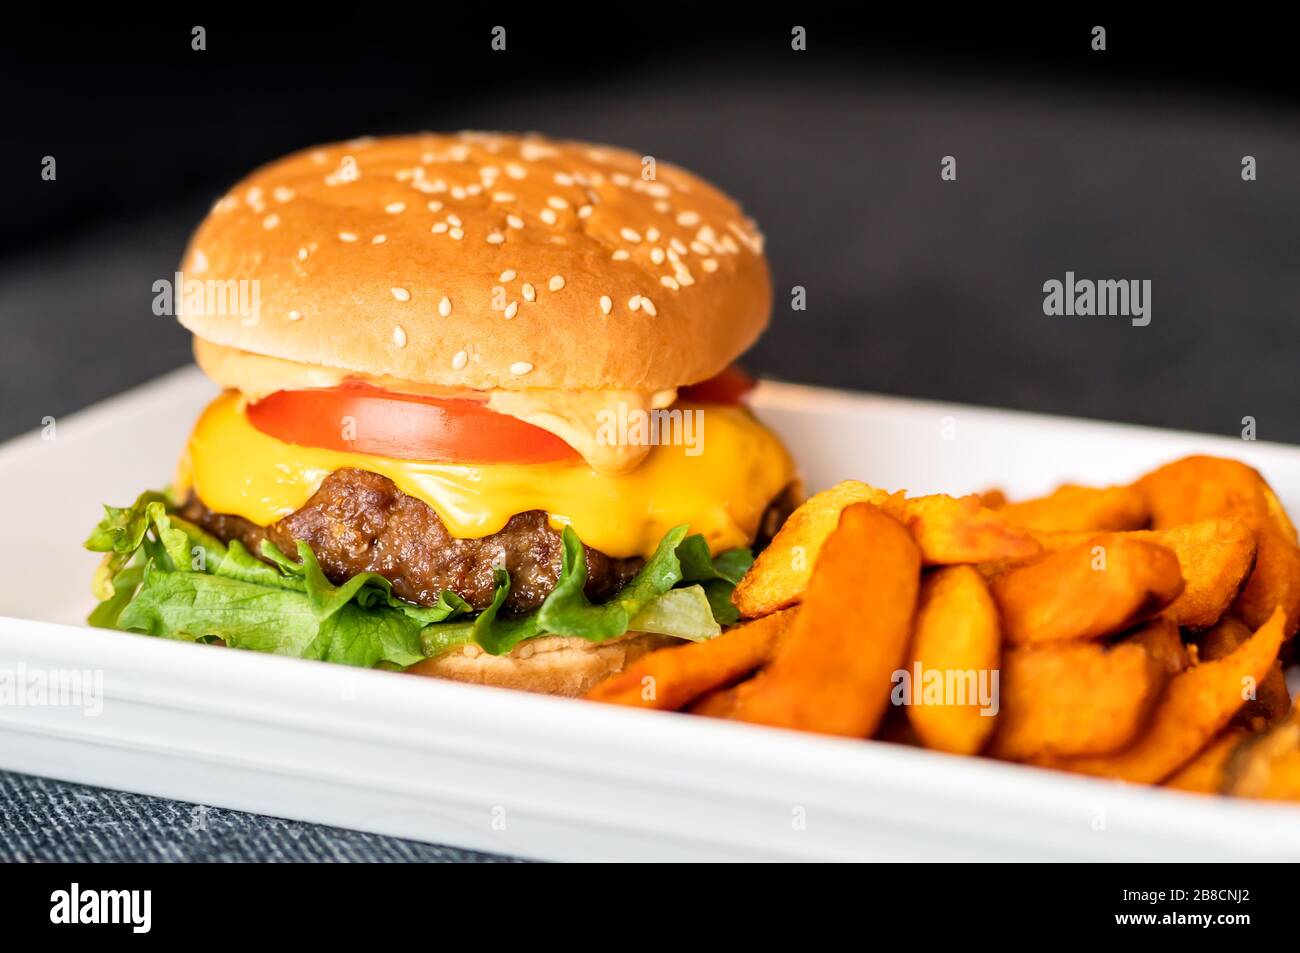 Burger meal on plate. Delicious hamburger with juicy beef, melting cheddar cheese served with crispy sweet potato fries. Home cooking. Stock Photo